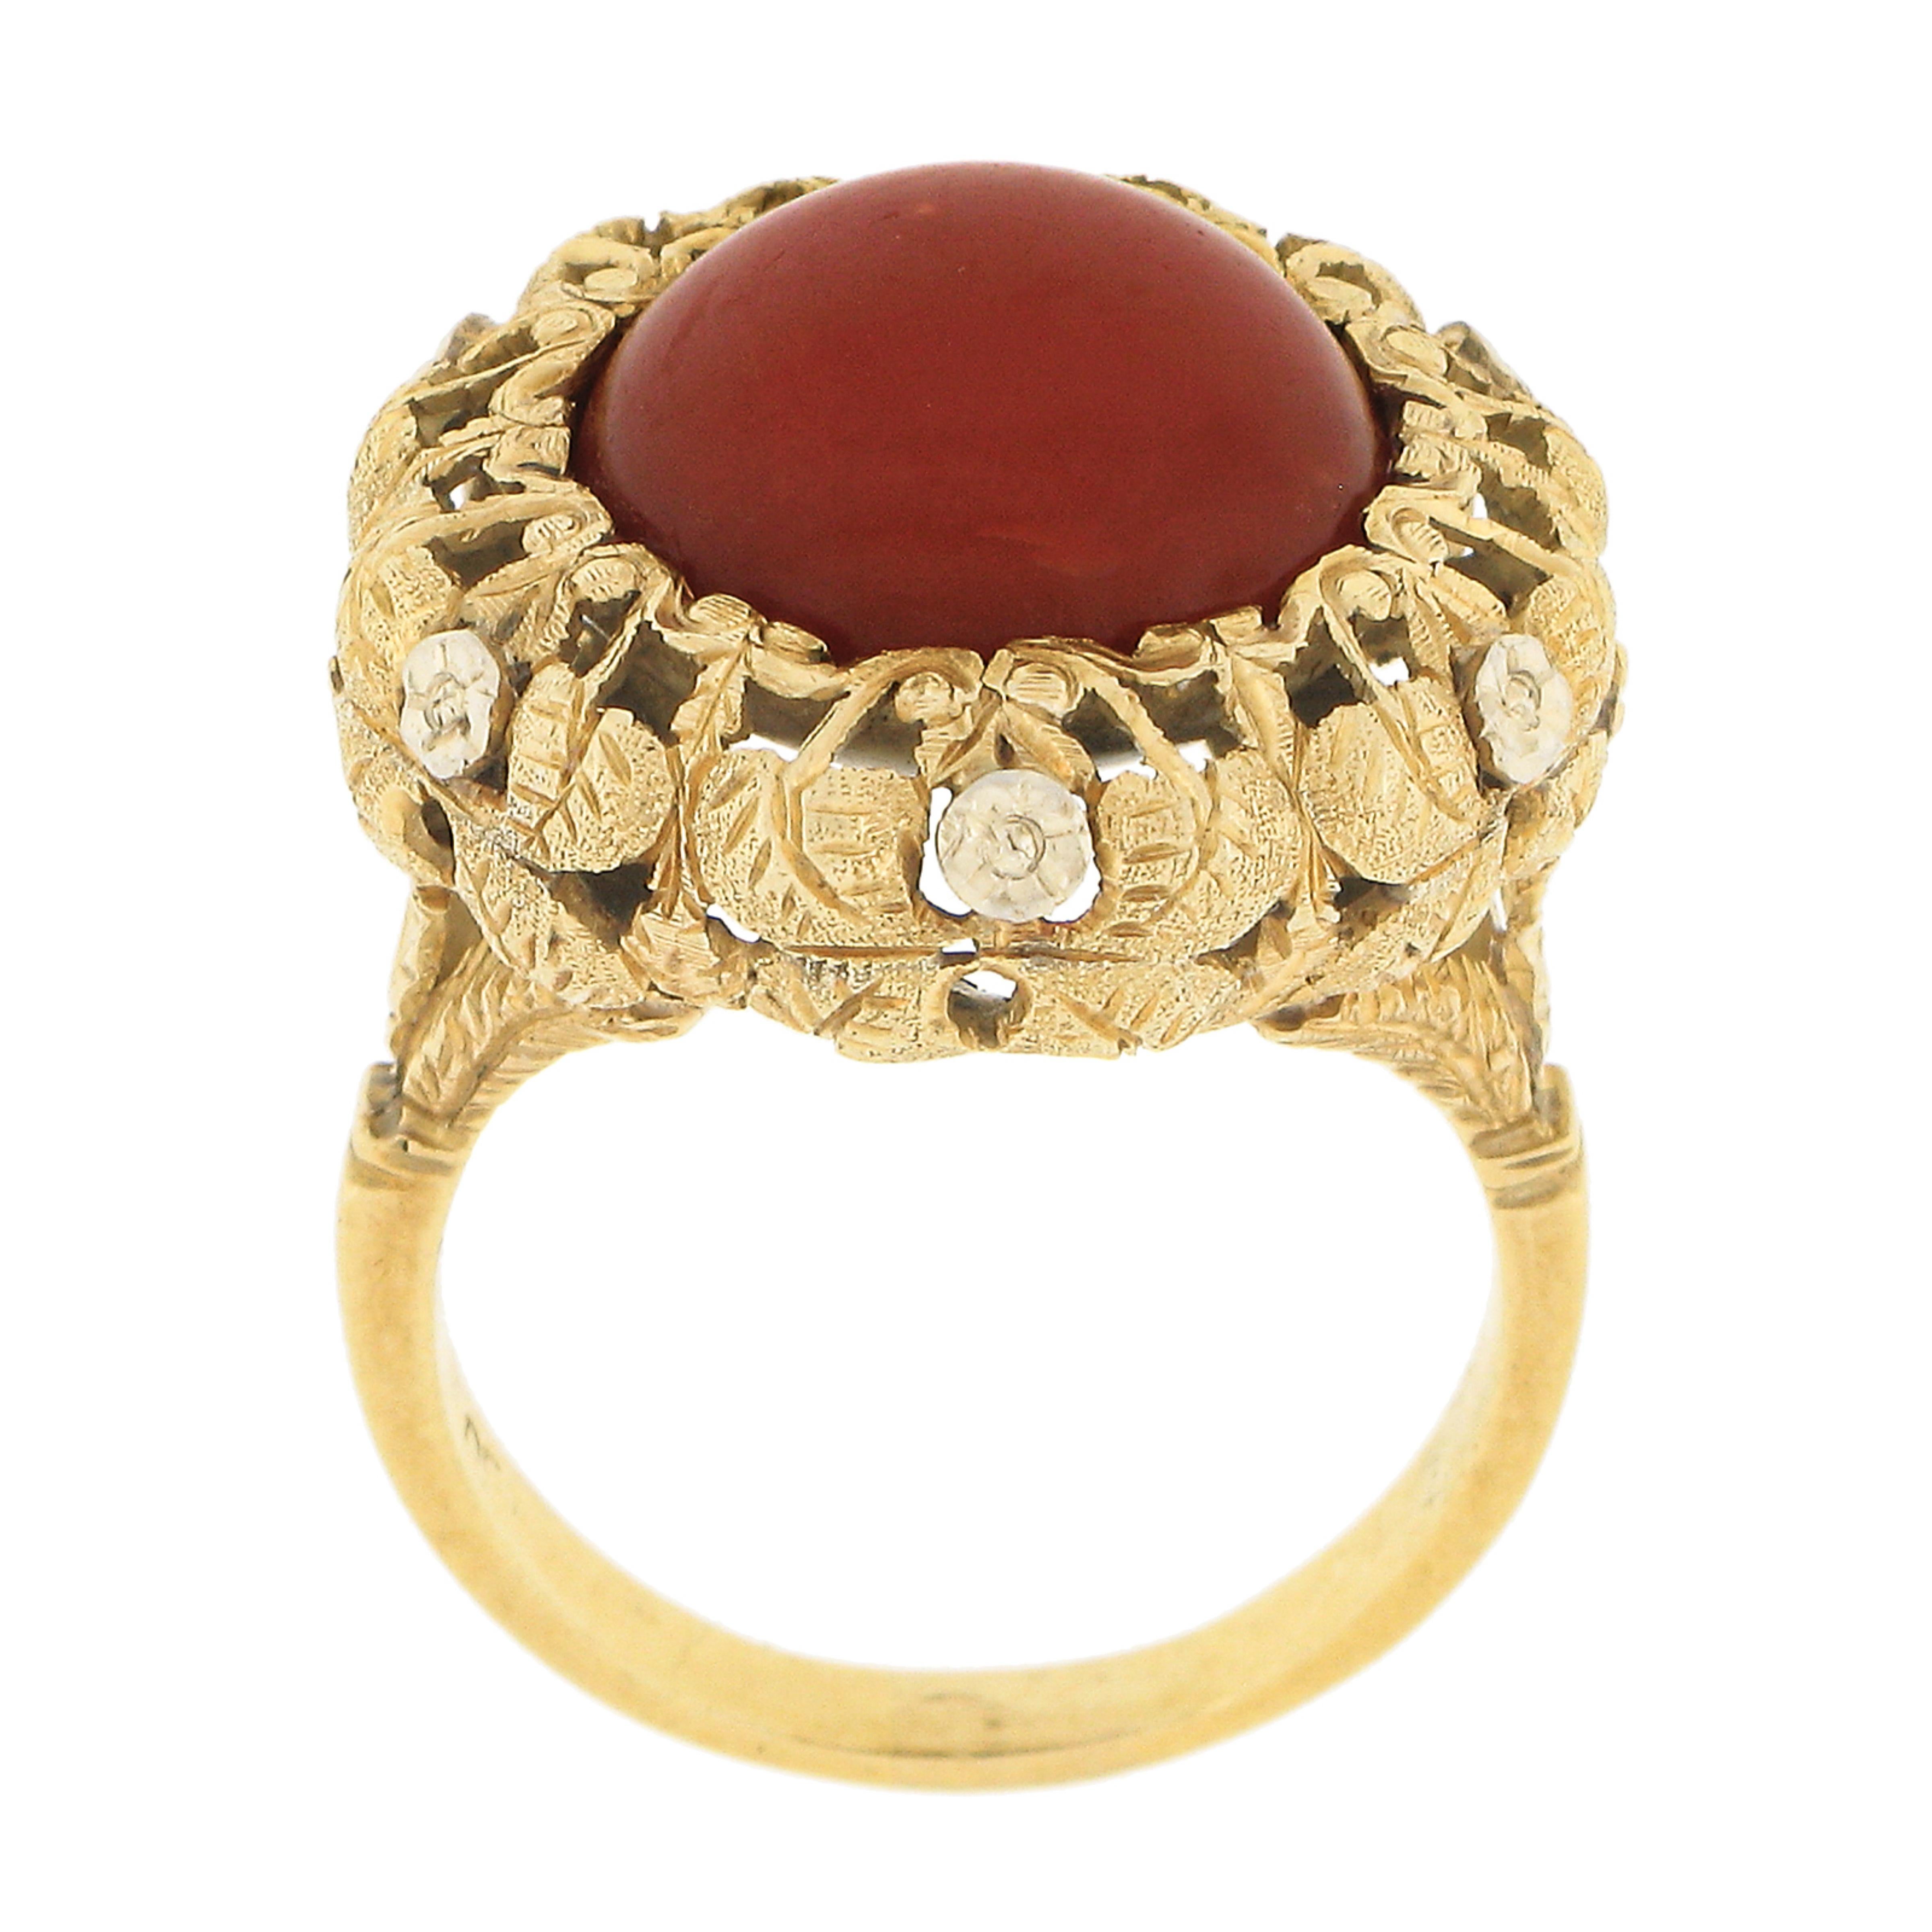 Women's Vintage 18k Gold GIA Round Cabochon Orangy-Red Coral w/ Hand Engraved Frame Ring